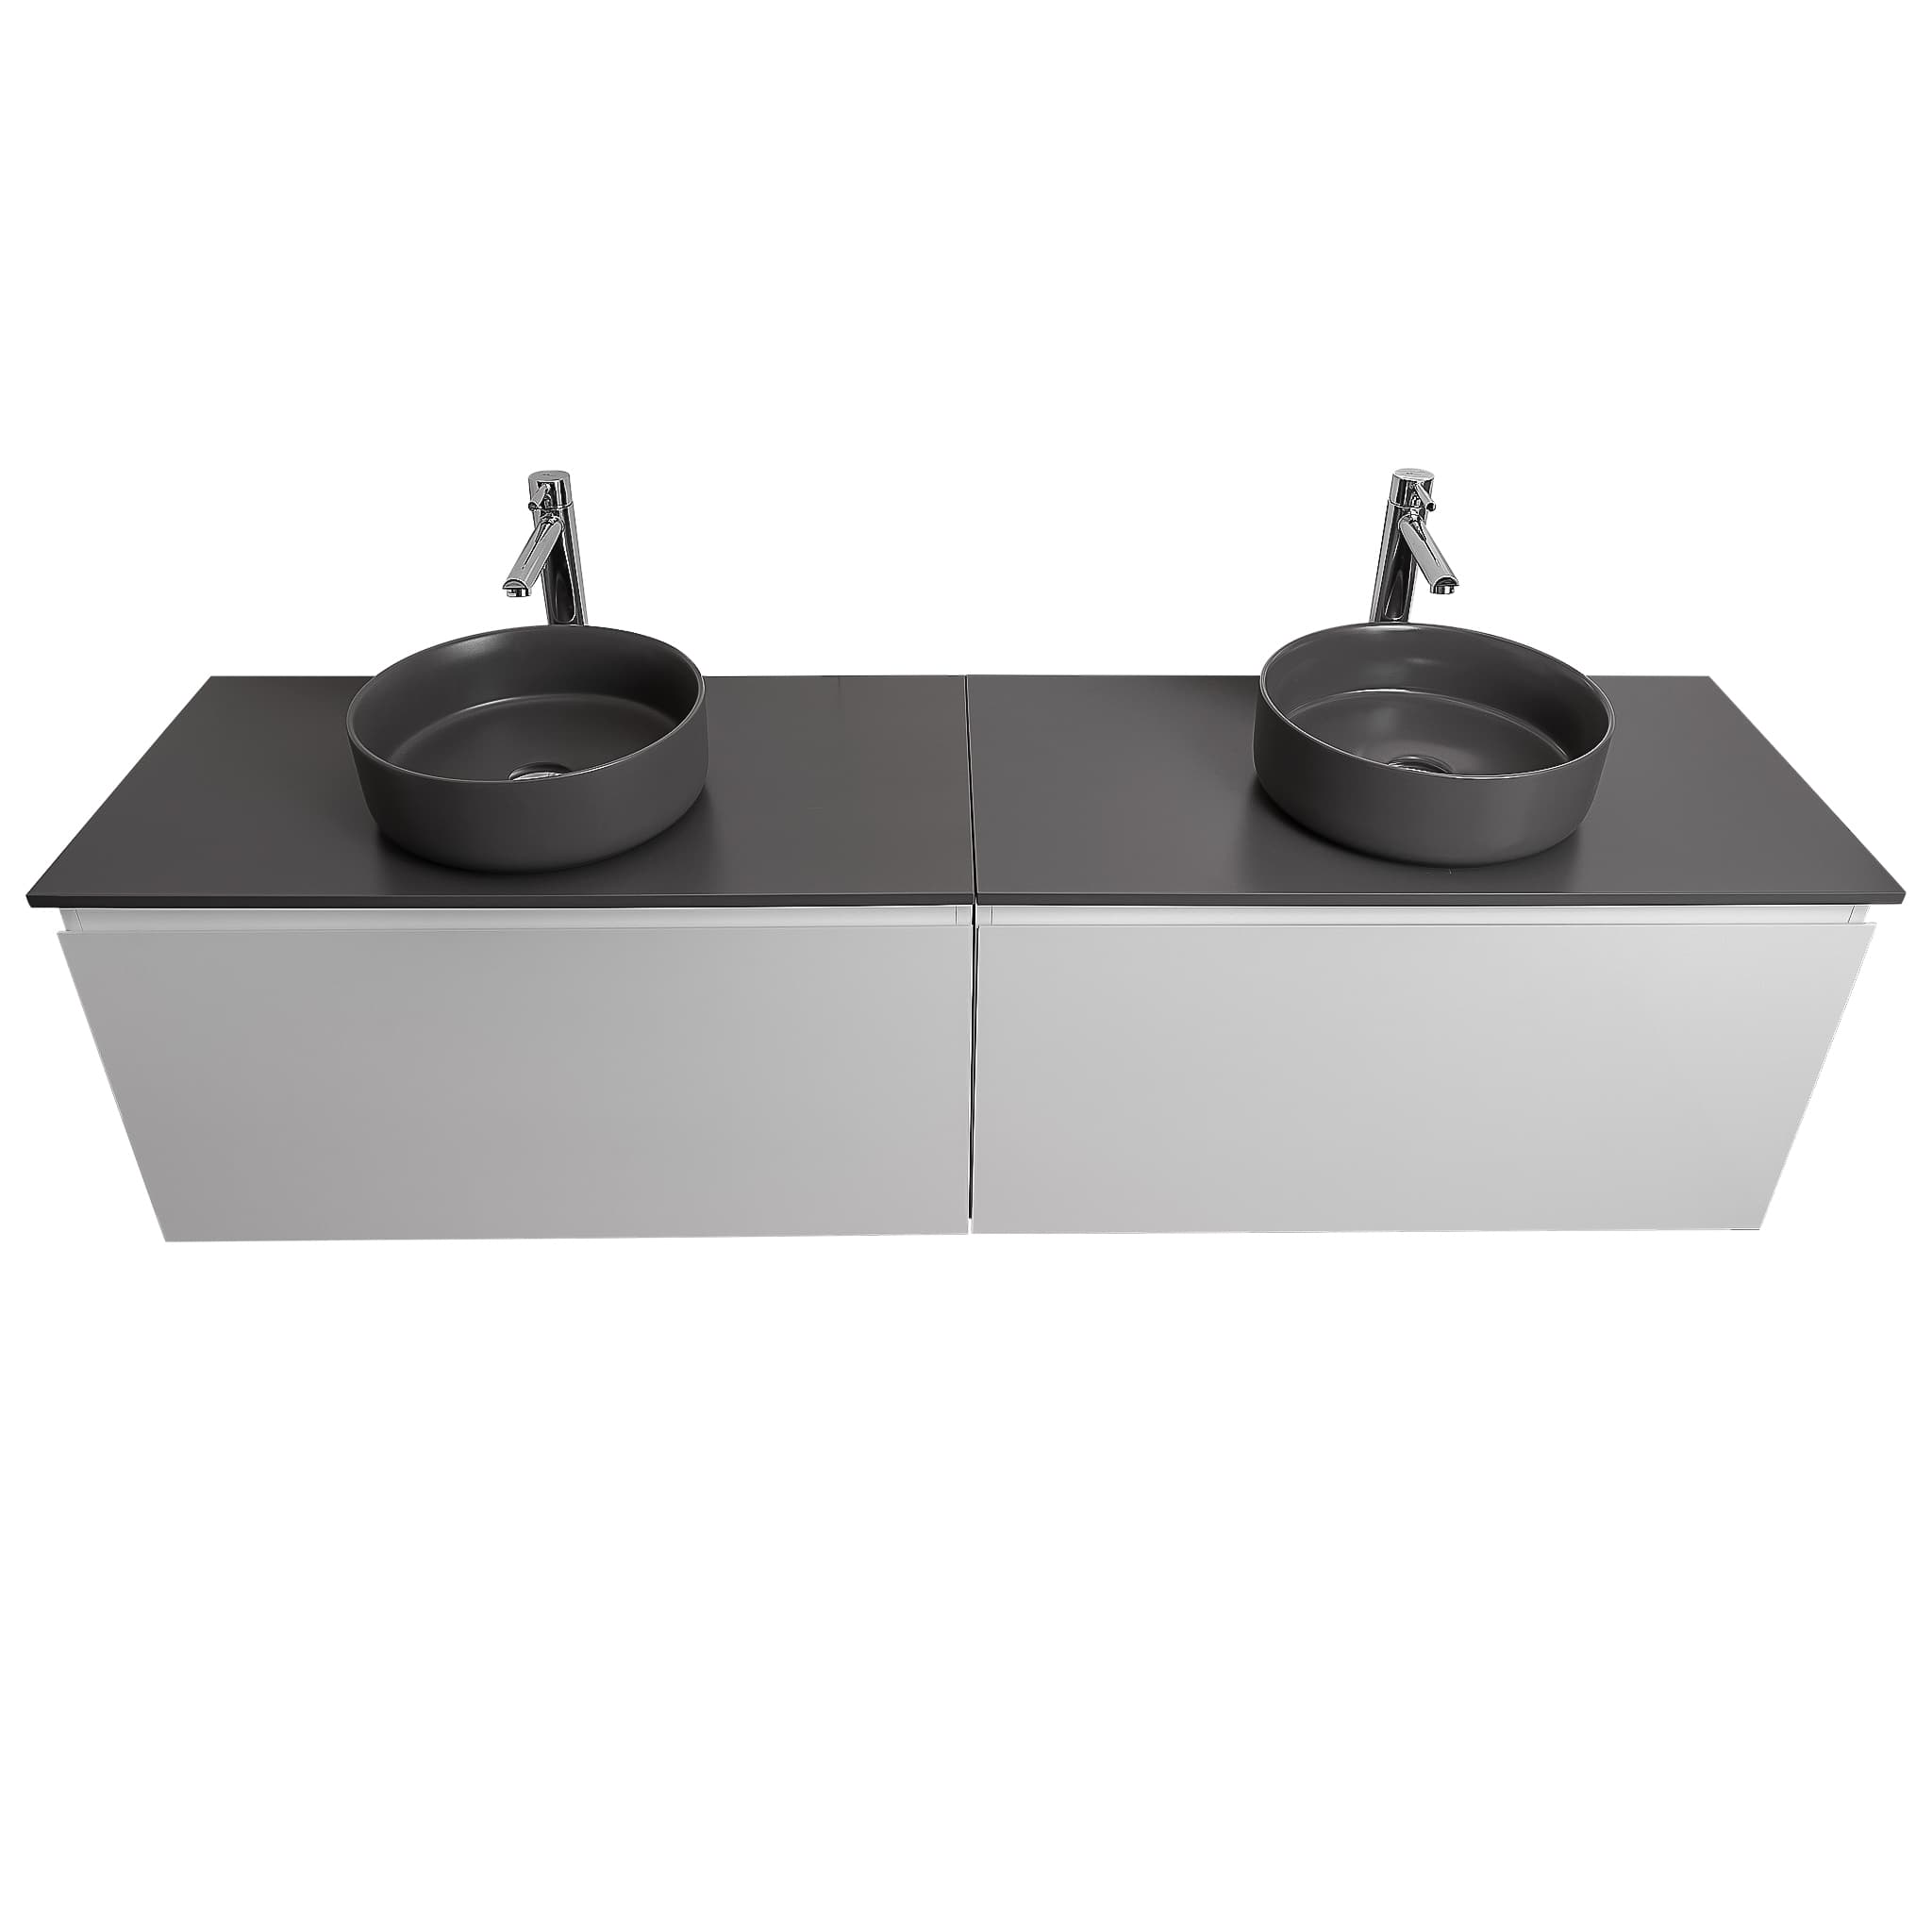 Venice 63 White High Gloss Cabinet, Ares Grey Ceniza Top And Two Ares Grey Ceniza Ceramic Basin, Wall Mounted Modern Vanity Set